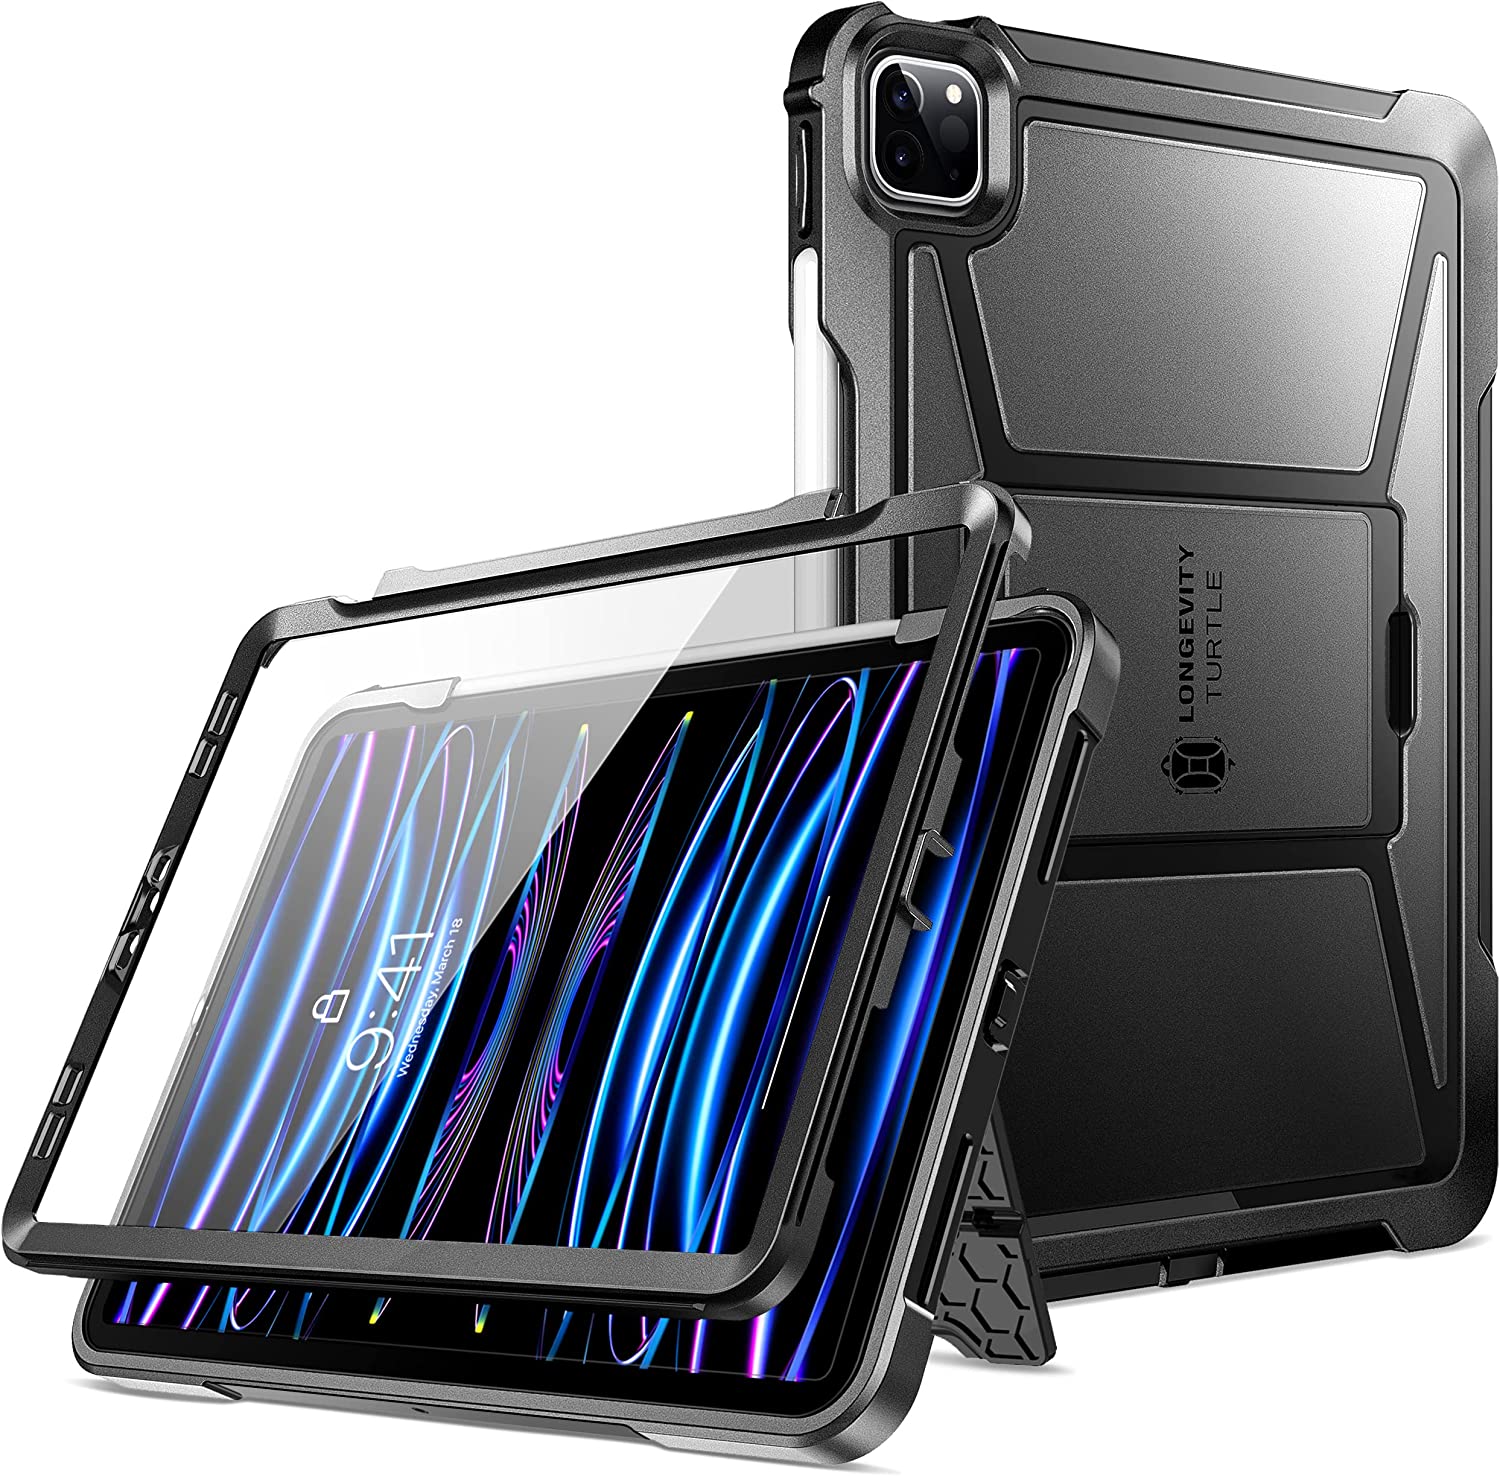 ZtotopCases iPad Pro 11 Case 2024/2021 with Screen Protector, Shockproof Dual Layer Full Protective Cover with Kickstand and Pencil Holder for 2024/2021 iPad Pro 11 Case 3rd Generation, Black